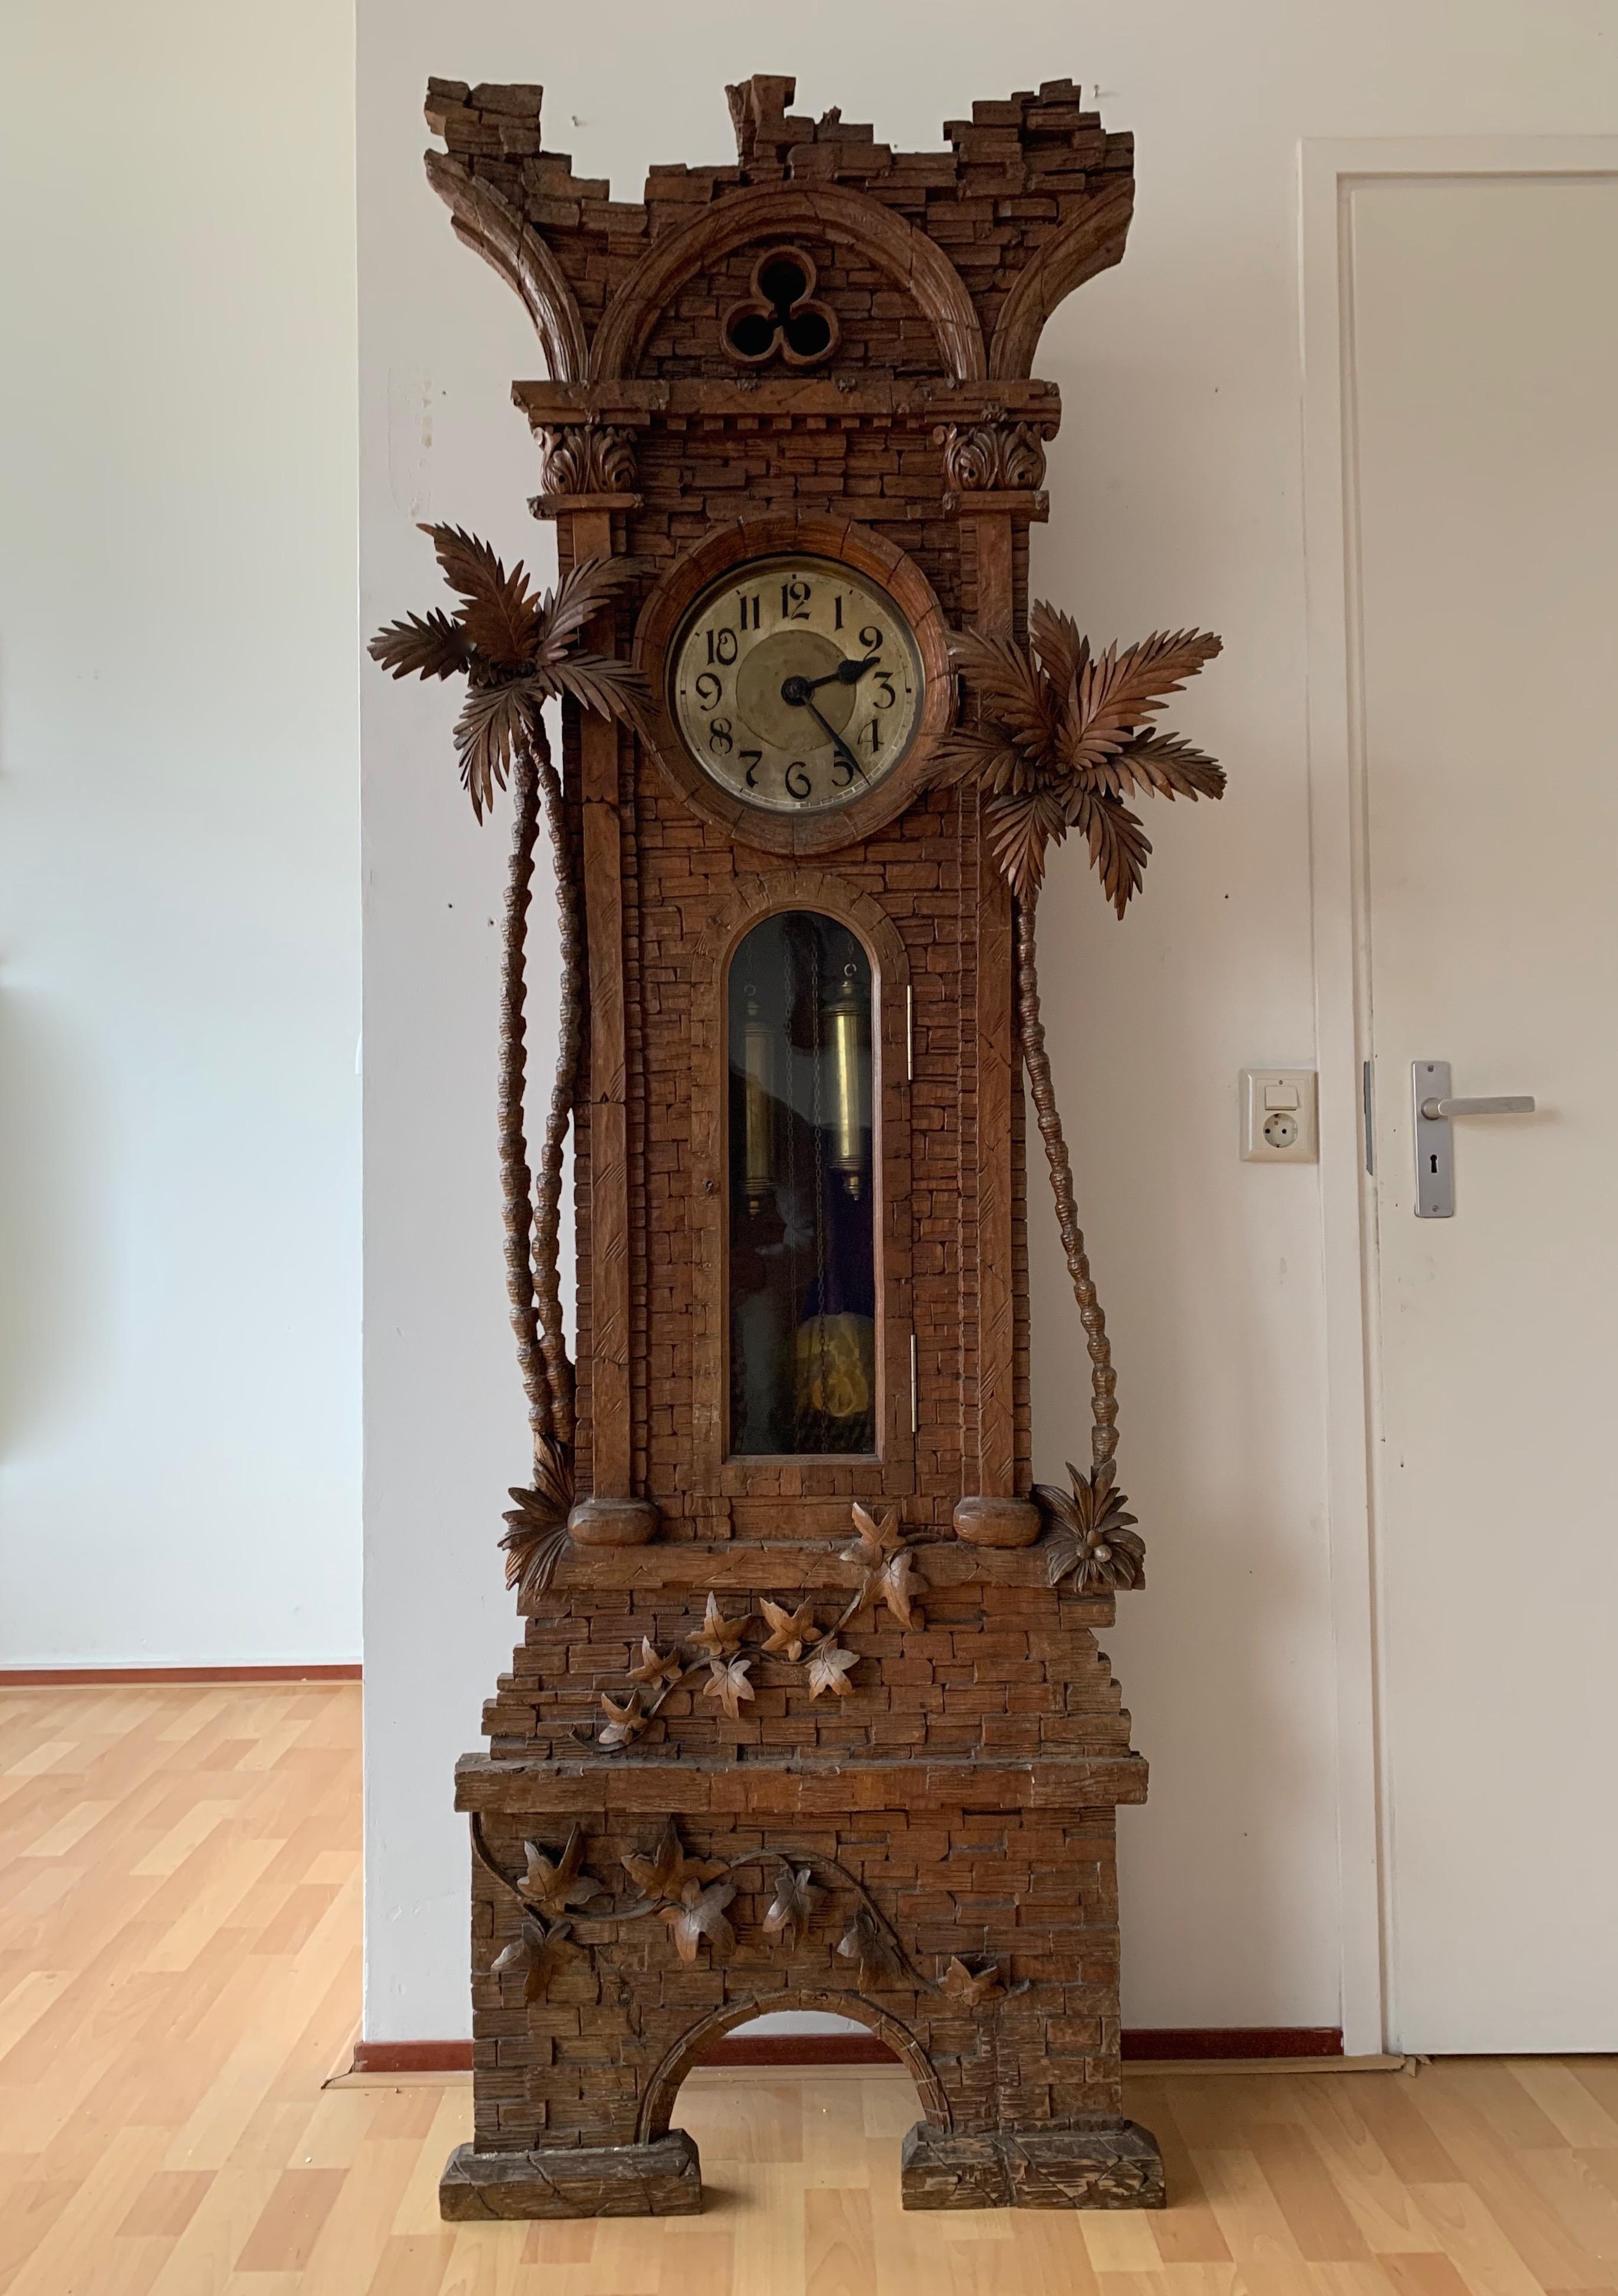 Large, antique and unique Black Forest work of time telling art.

We have sold many rare and great quality Black Forest antiques, but this latest find is unlike anything that we have ever seen. This one of a kind, Swiss antique is all hand-carved